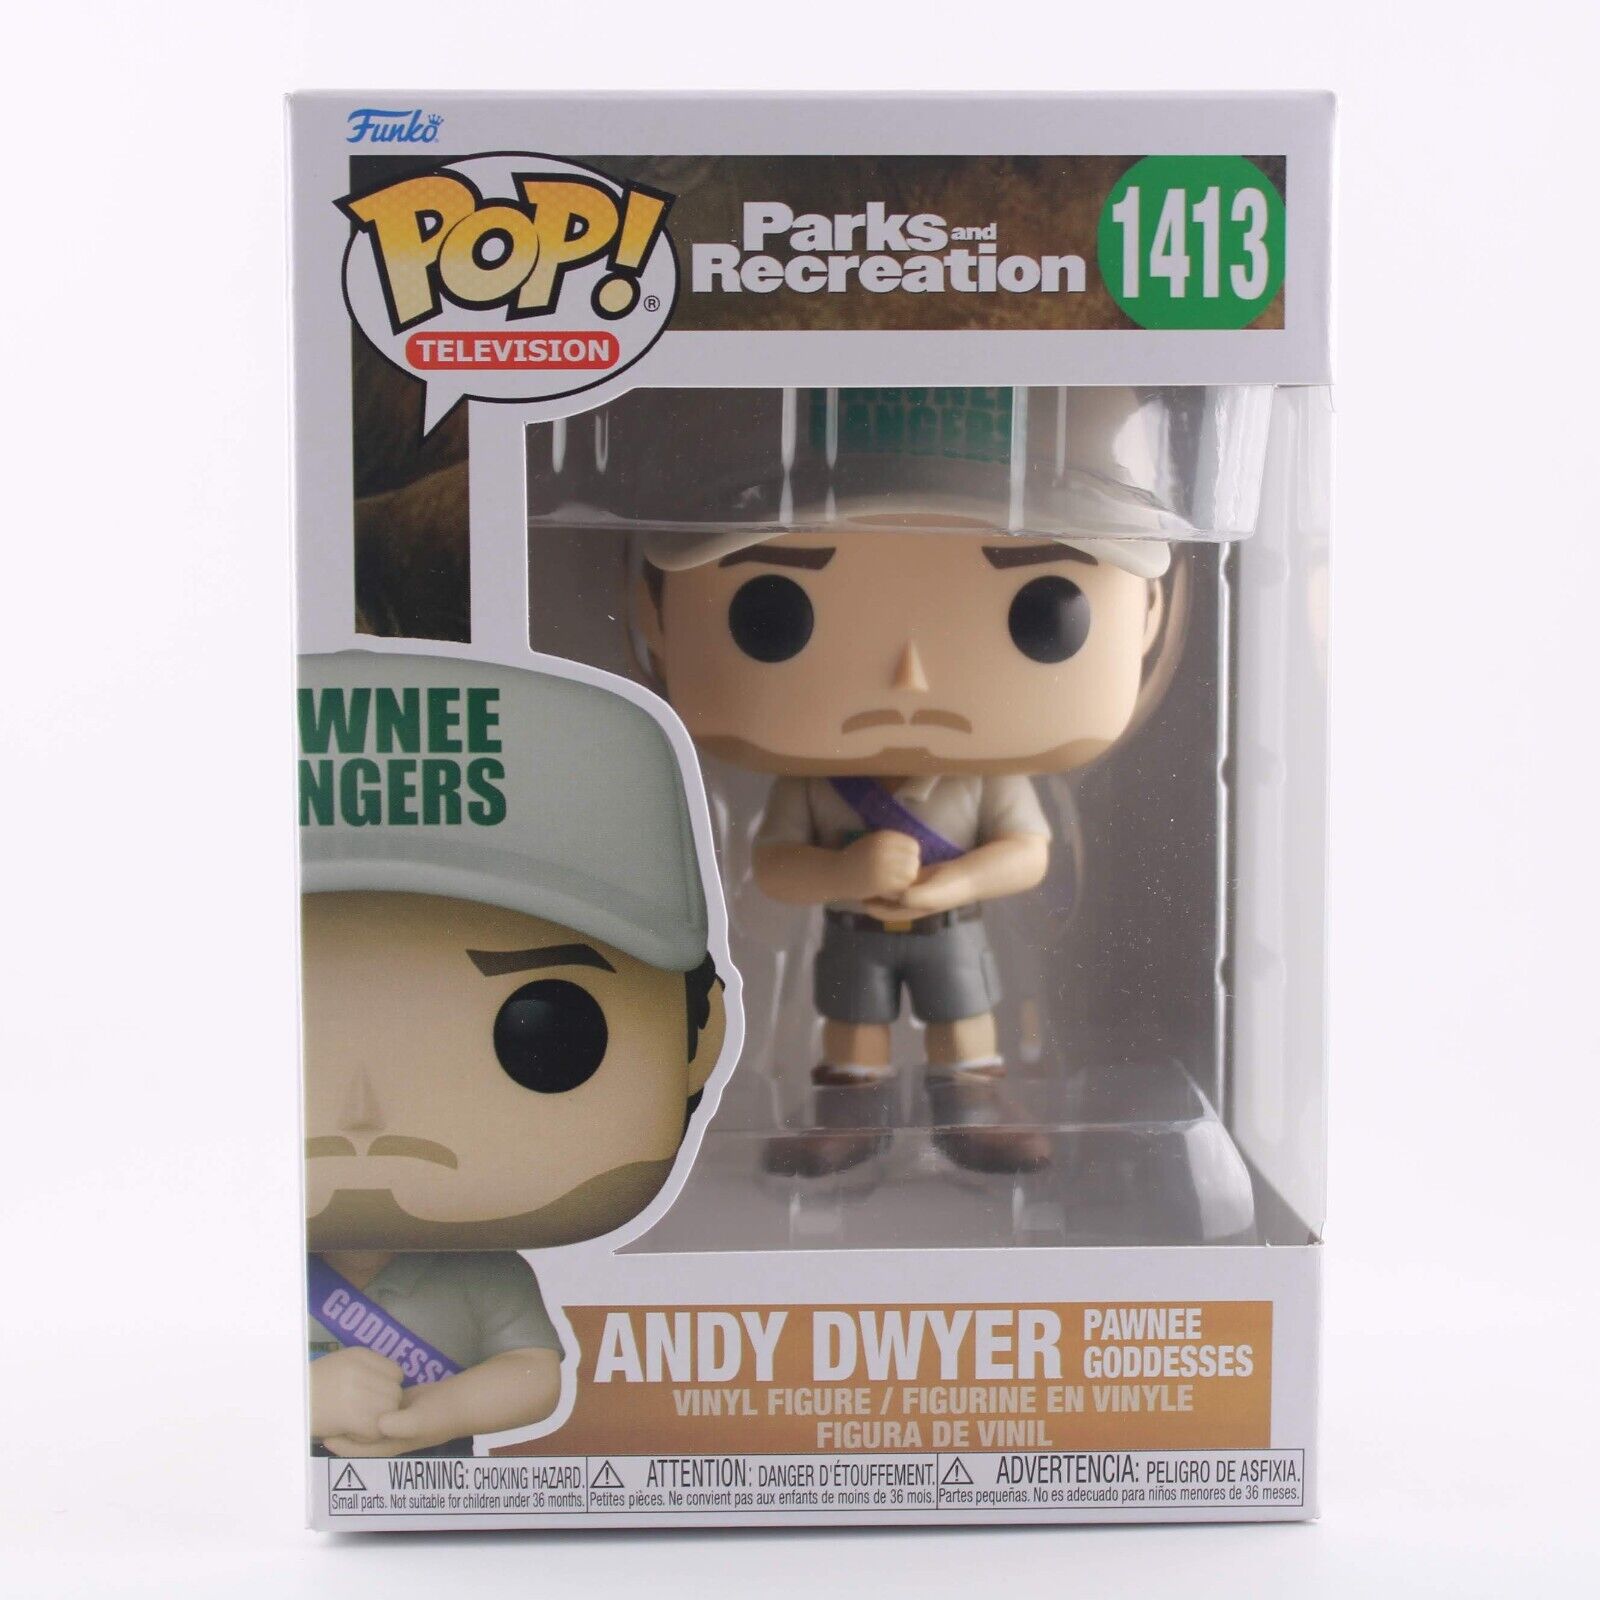 Funko Pop Parks and Recreation Andy Dwyer Pawnee Goddesses #1413